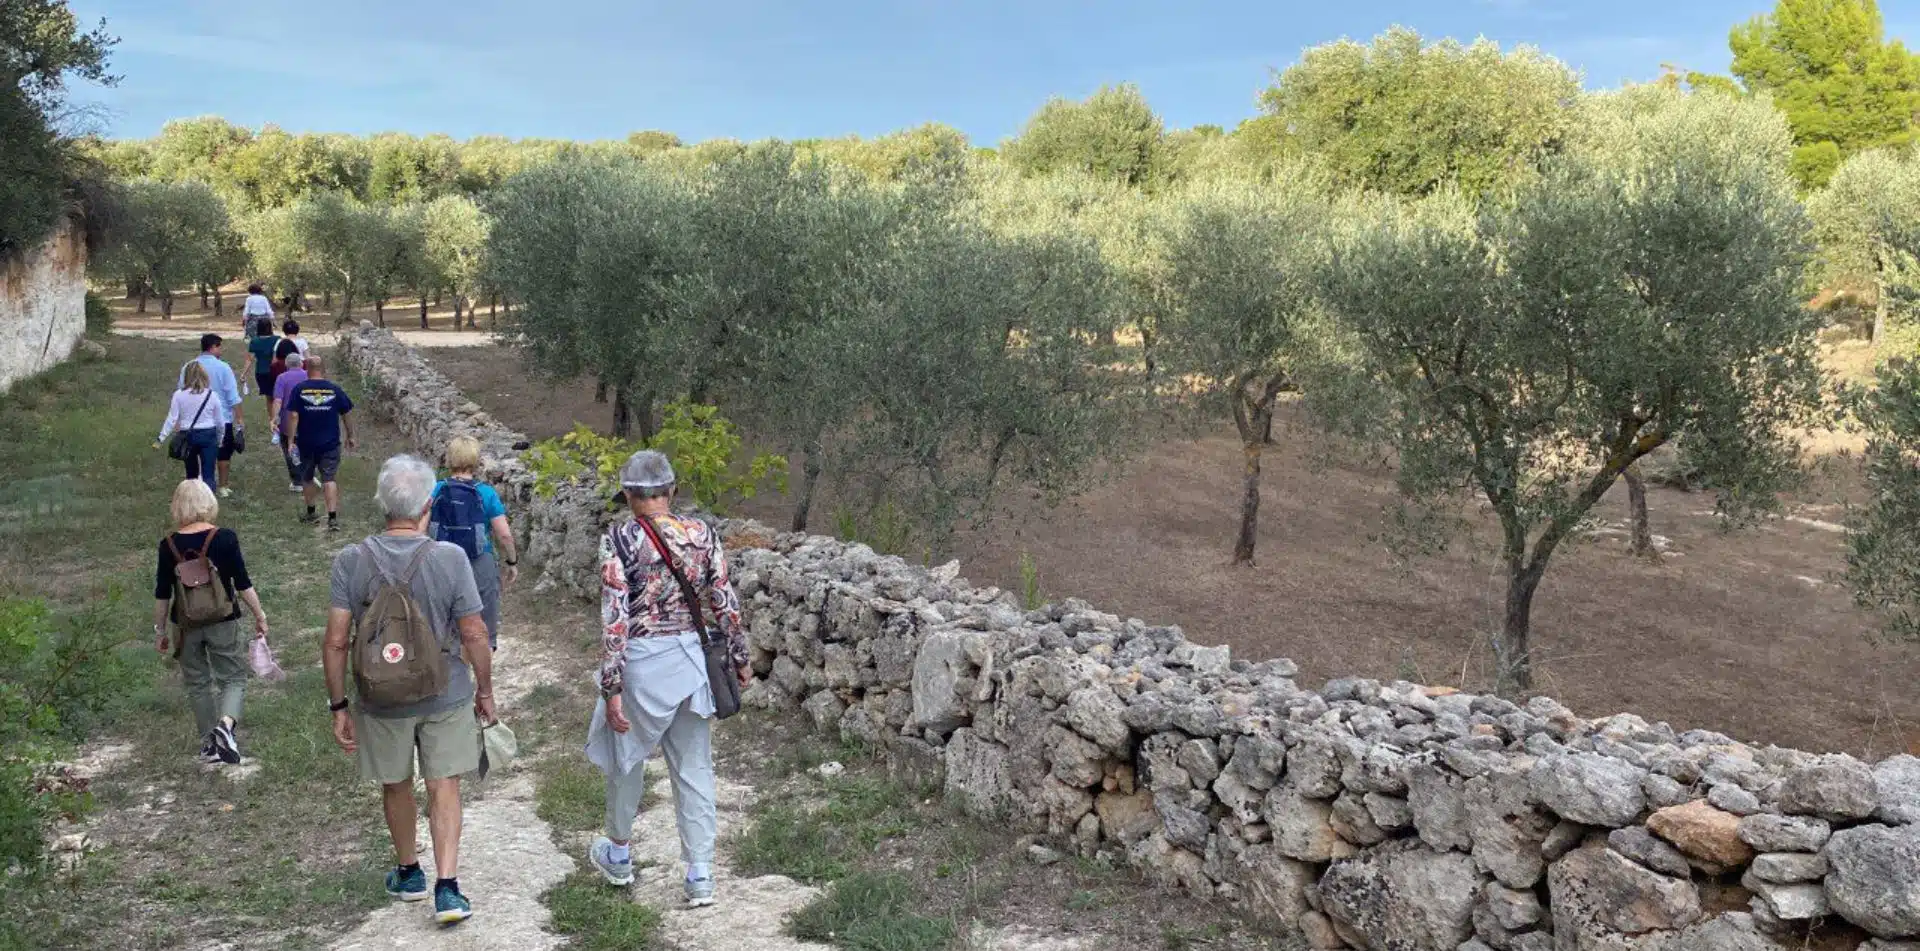 Walk among olive groves in Puglia, Italy